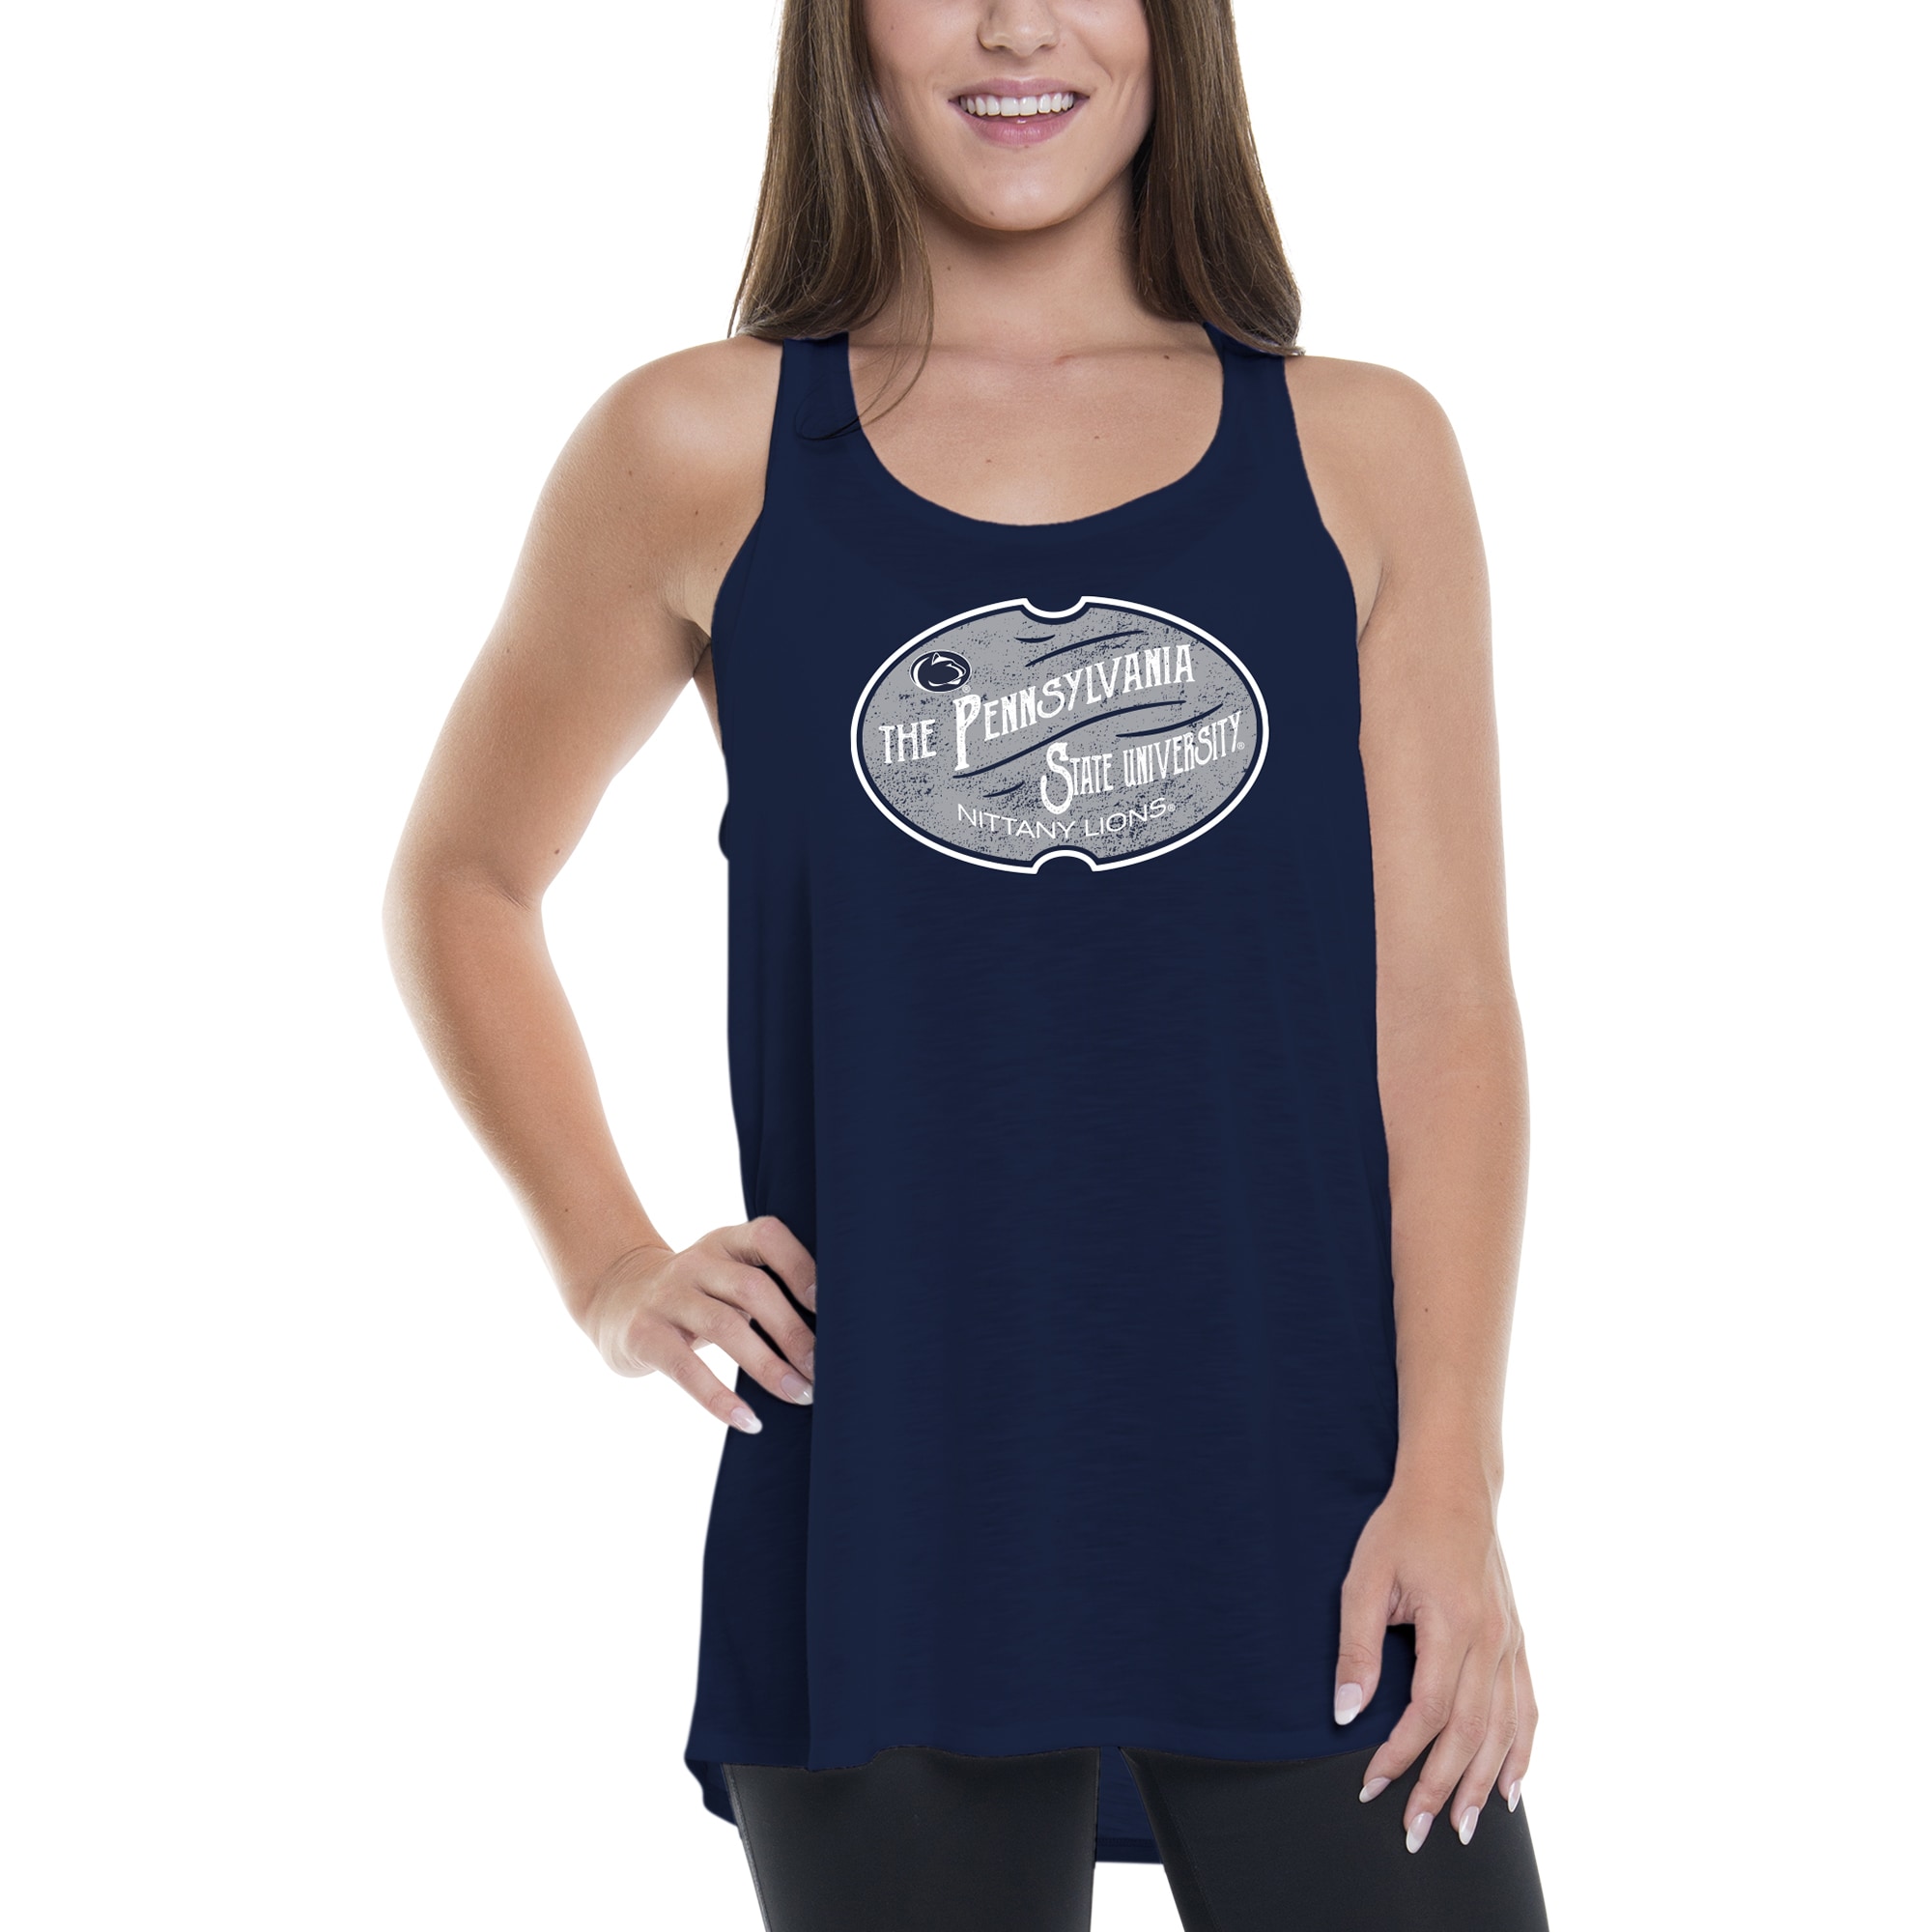 Women's Navy Penn State Nittany Lions Vintage Oval Tank Top - image 1 of 1